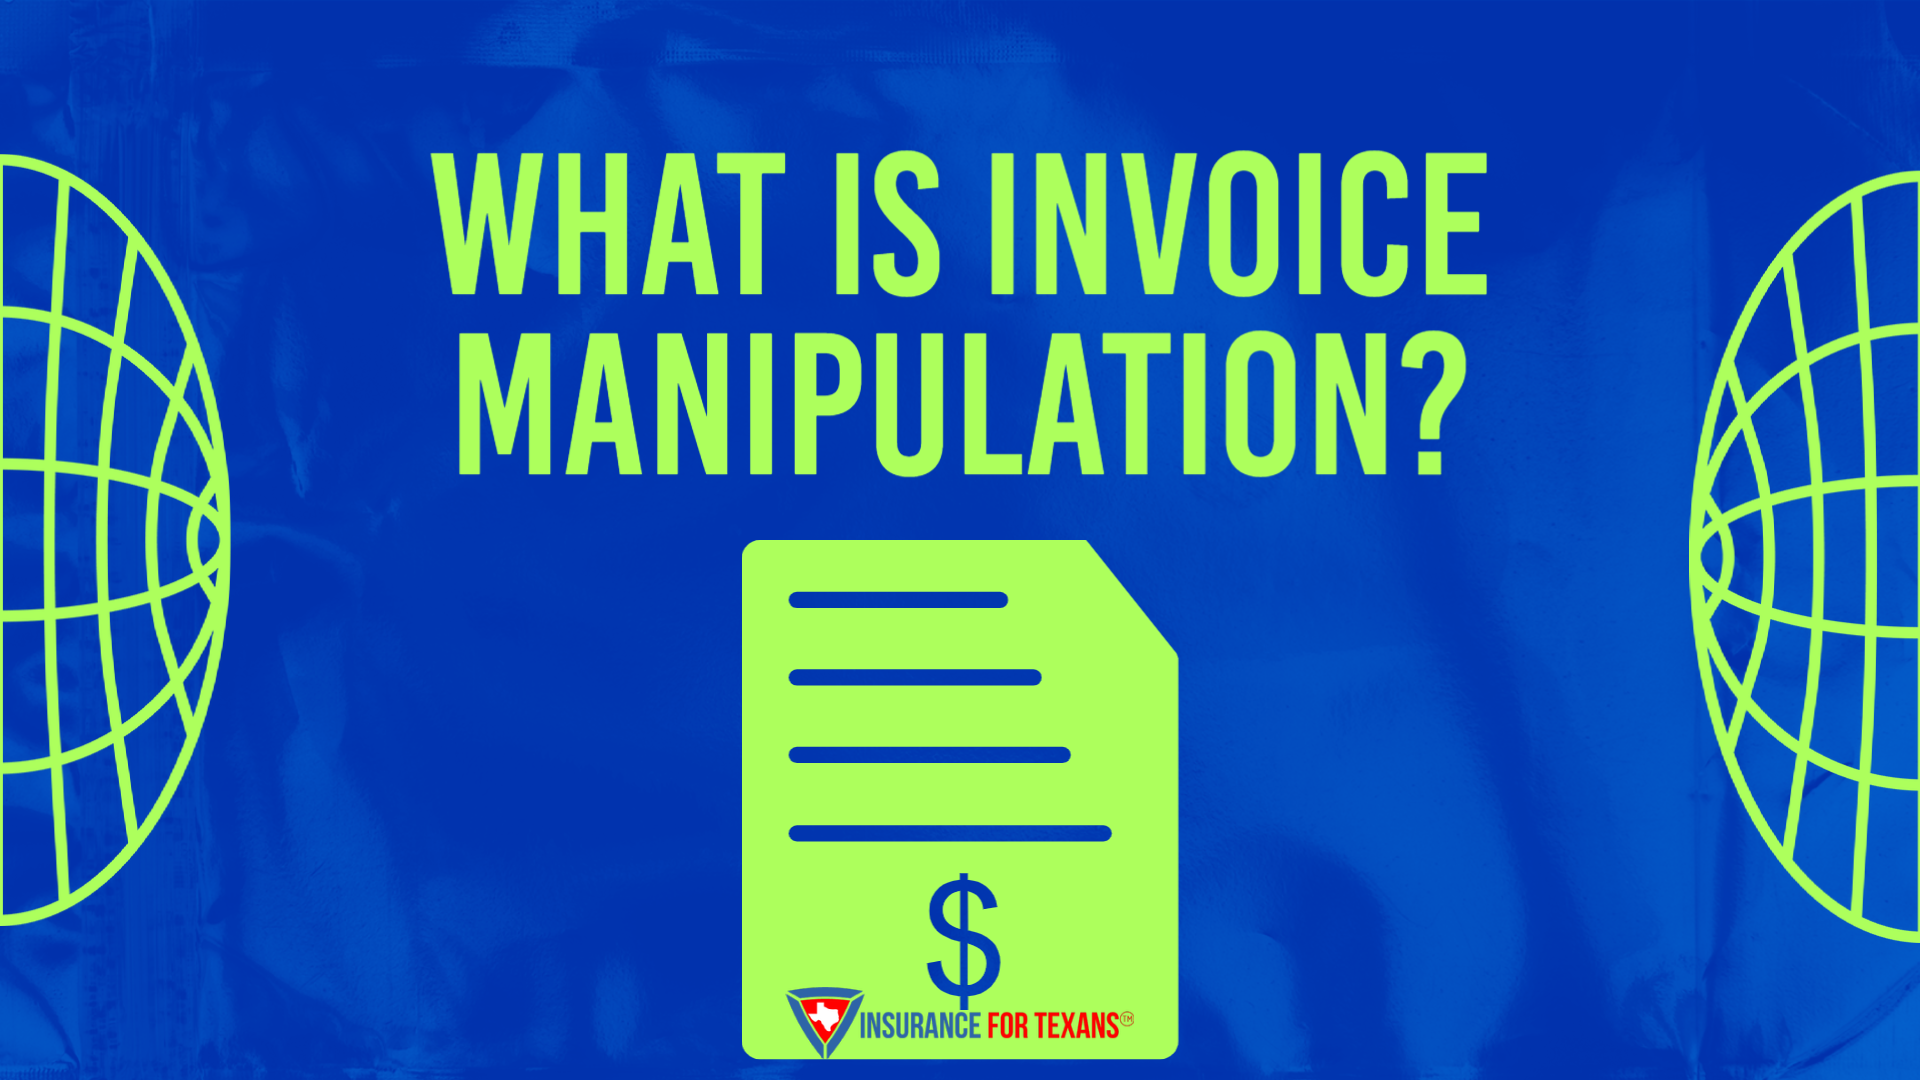 What Is Invoice Manipulation?